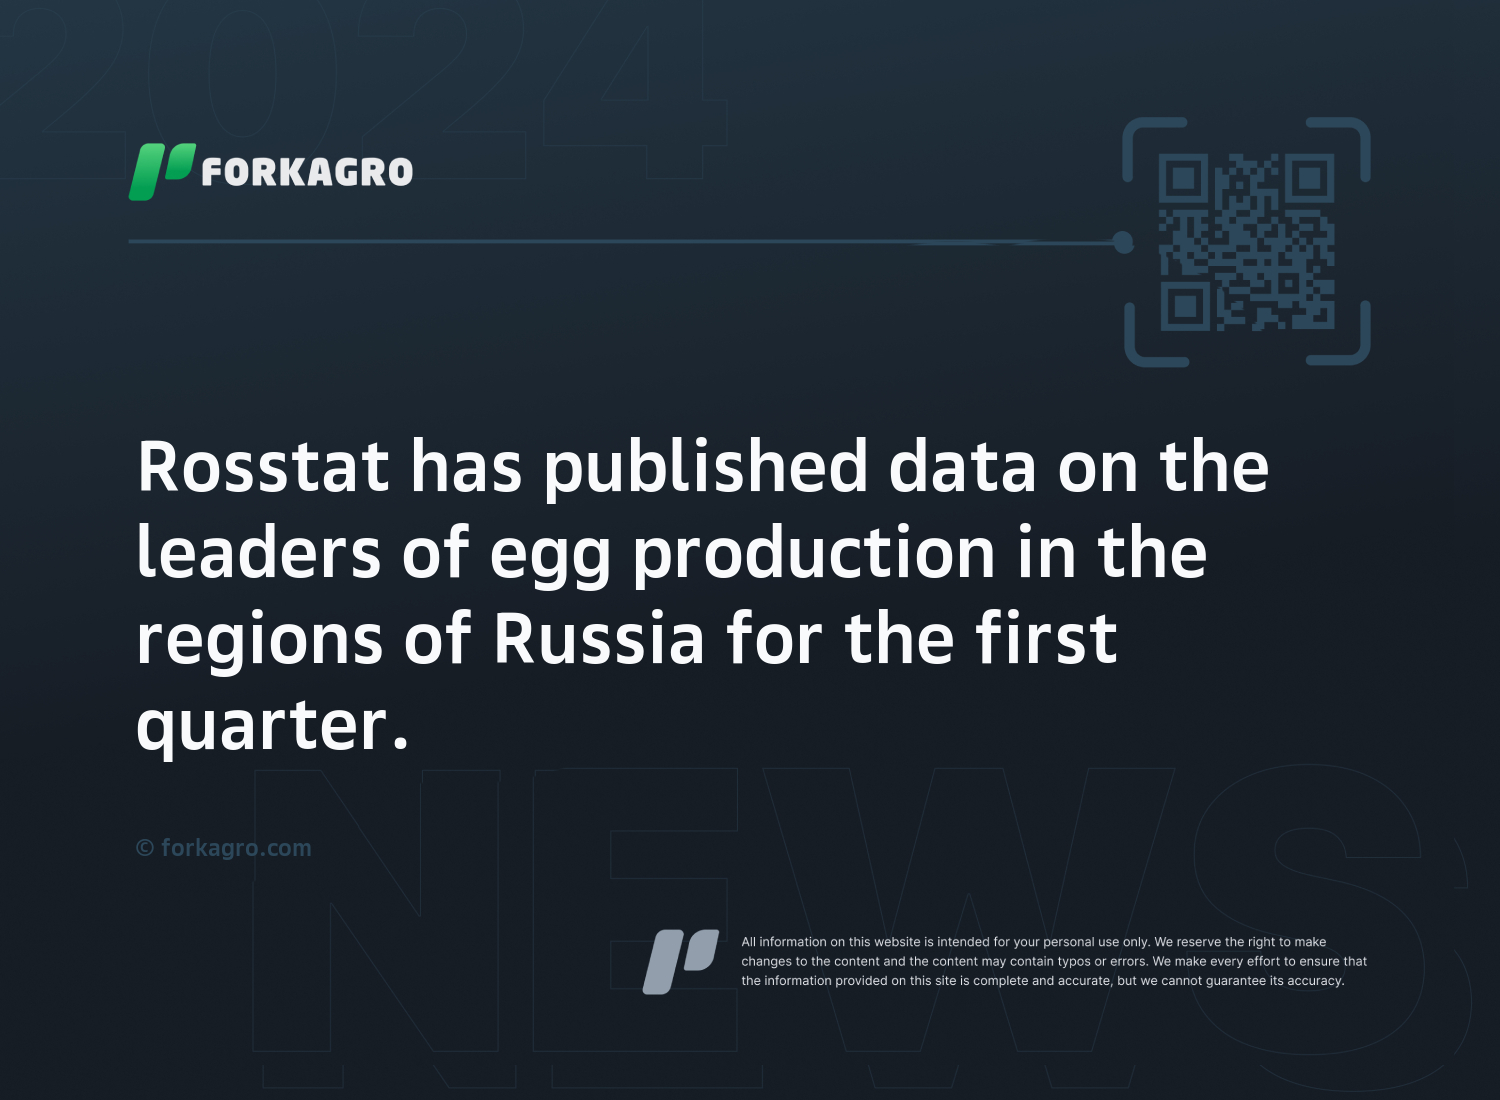 Rosstat has published data on the leaders of egg production in the regions of Russia for the first quarter.